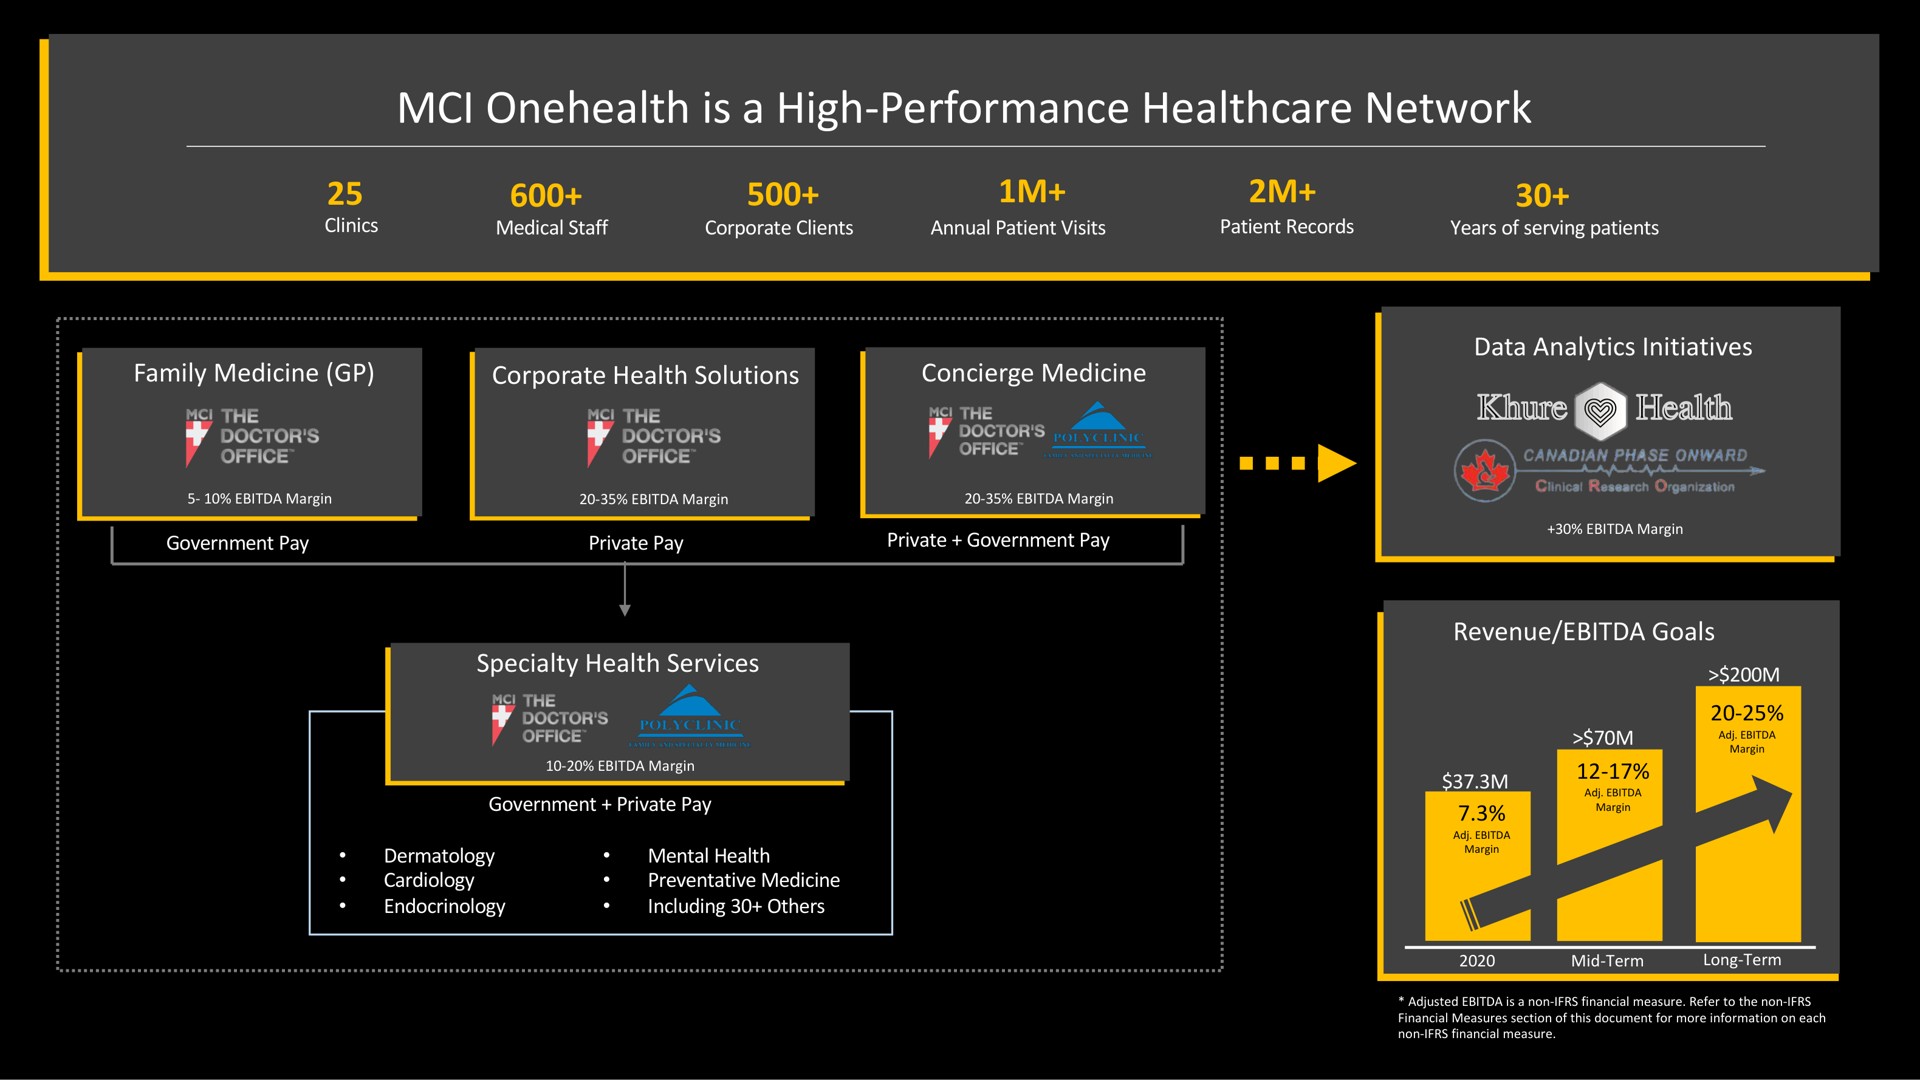 is a high performance network | MCI Onehealth